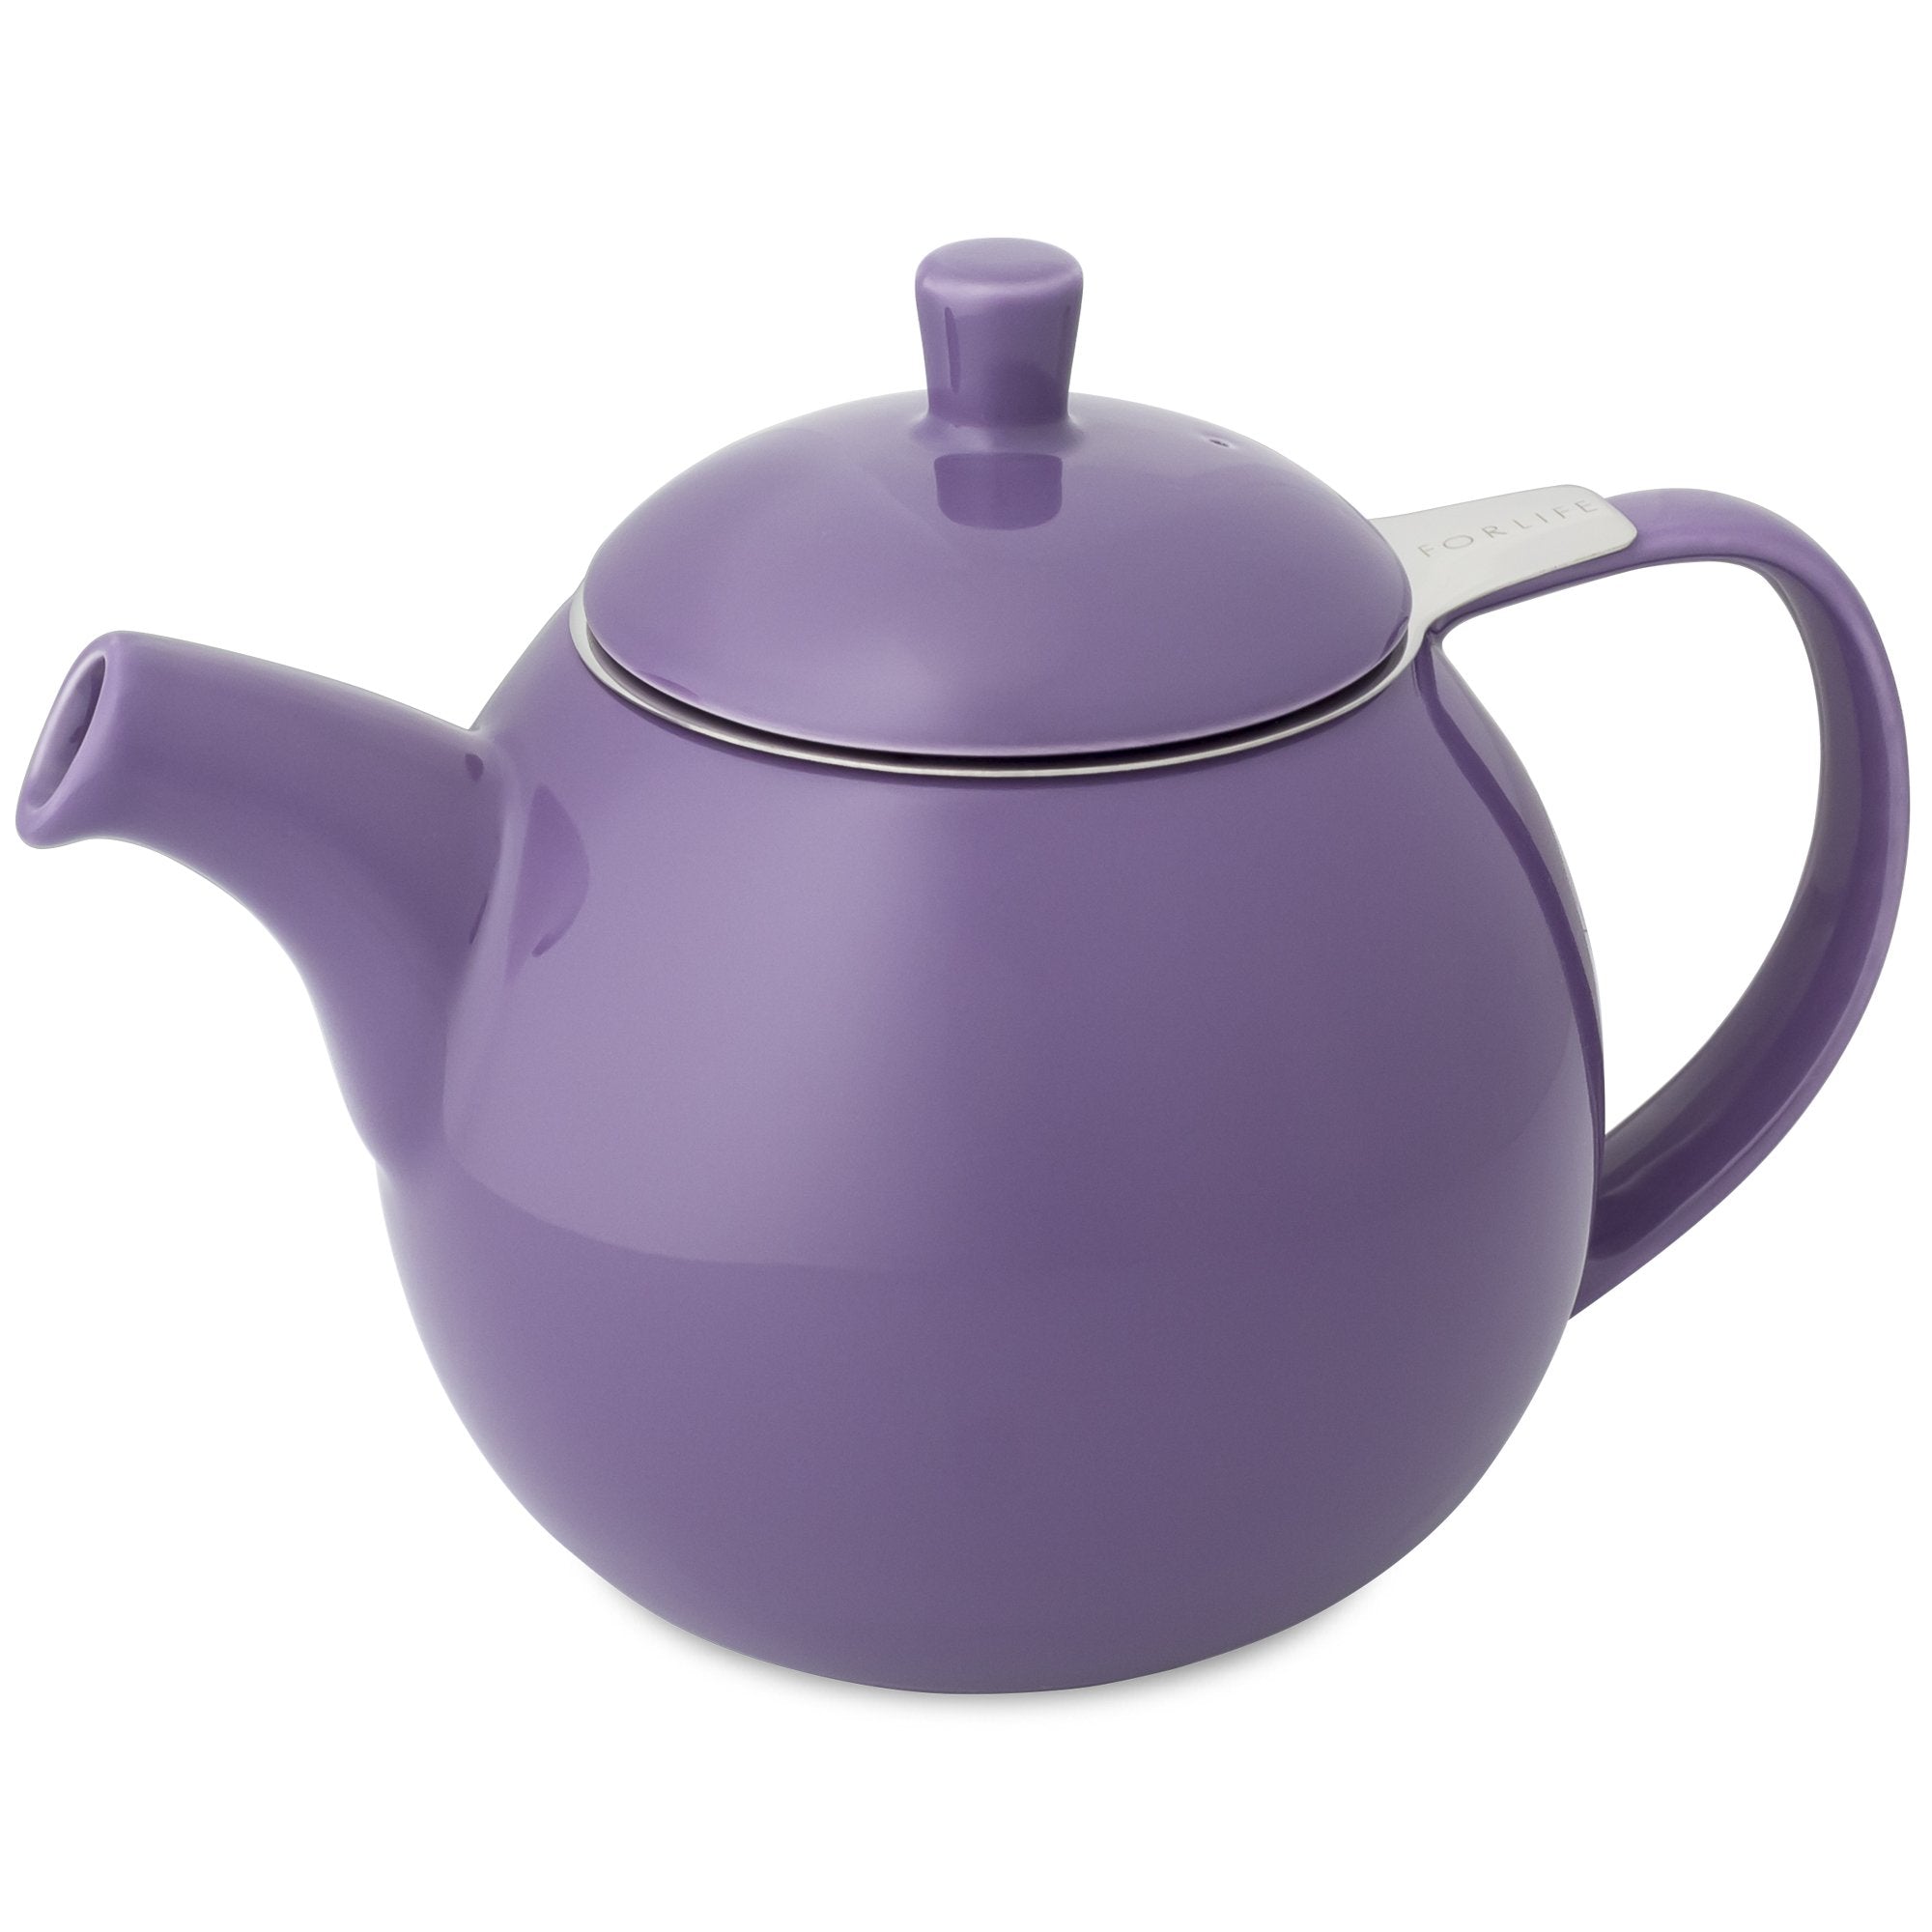 TeaLula 24 oz Curve sphere purple Teapot glossy surface finish and attached lid